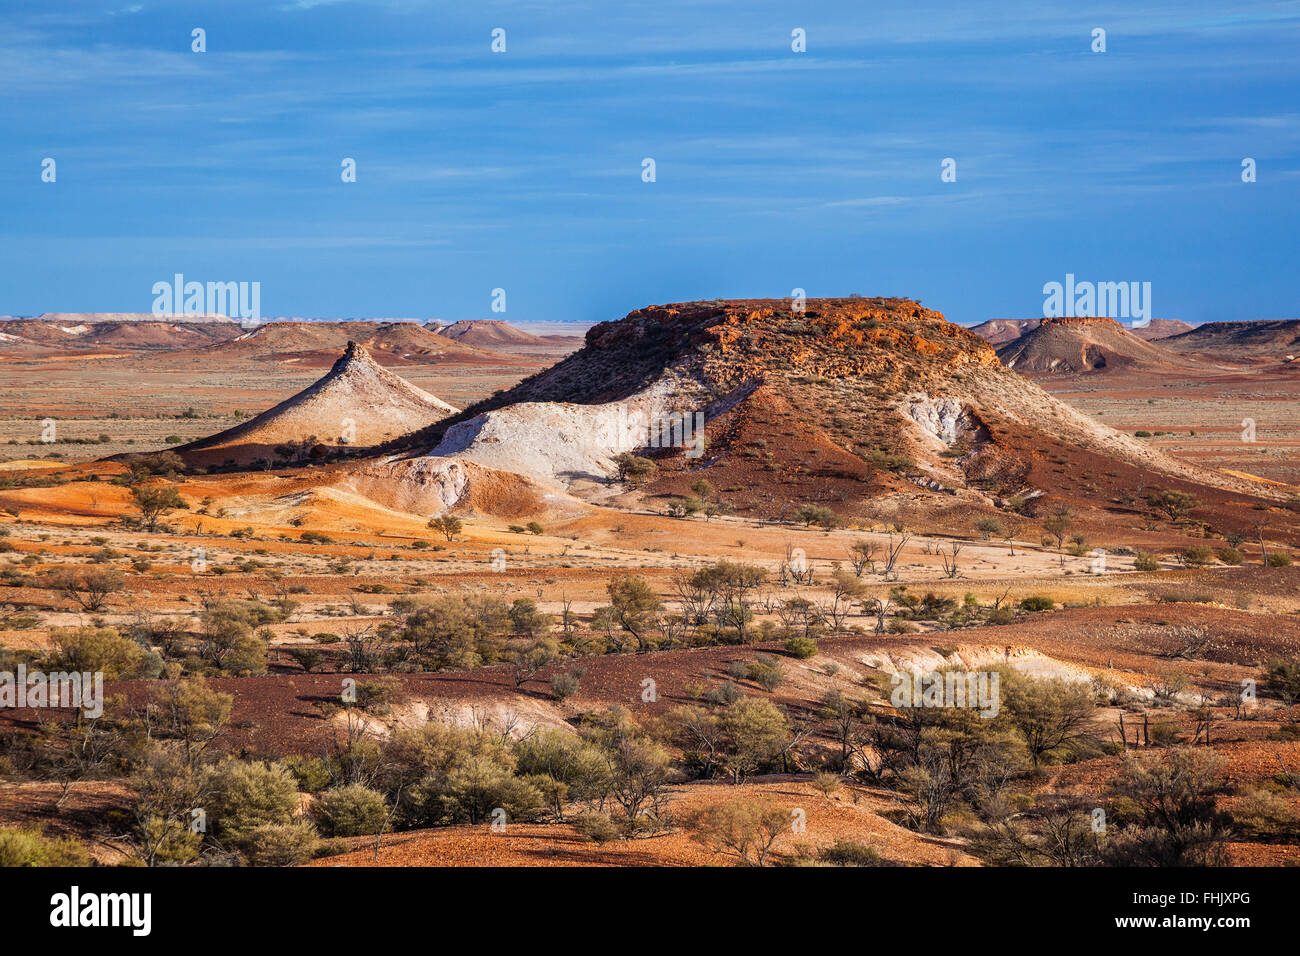 South Australia, the Breakaways Reserve near Coober Pedy. The colourful landscape with flat-topped mesas to stony gibber desert Stock Photo